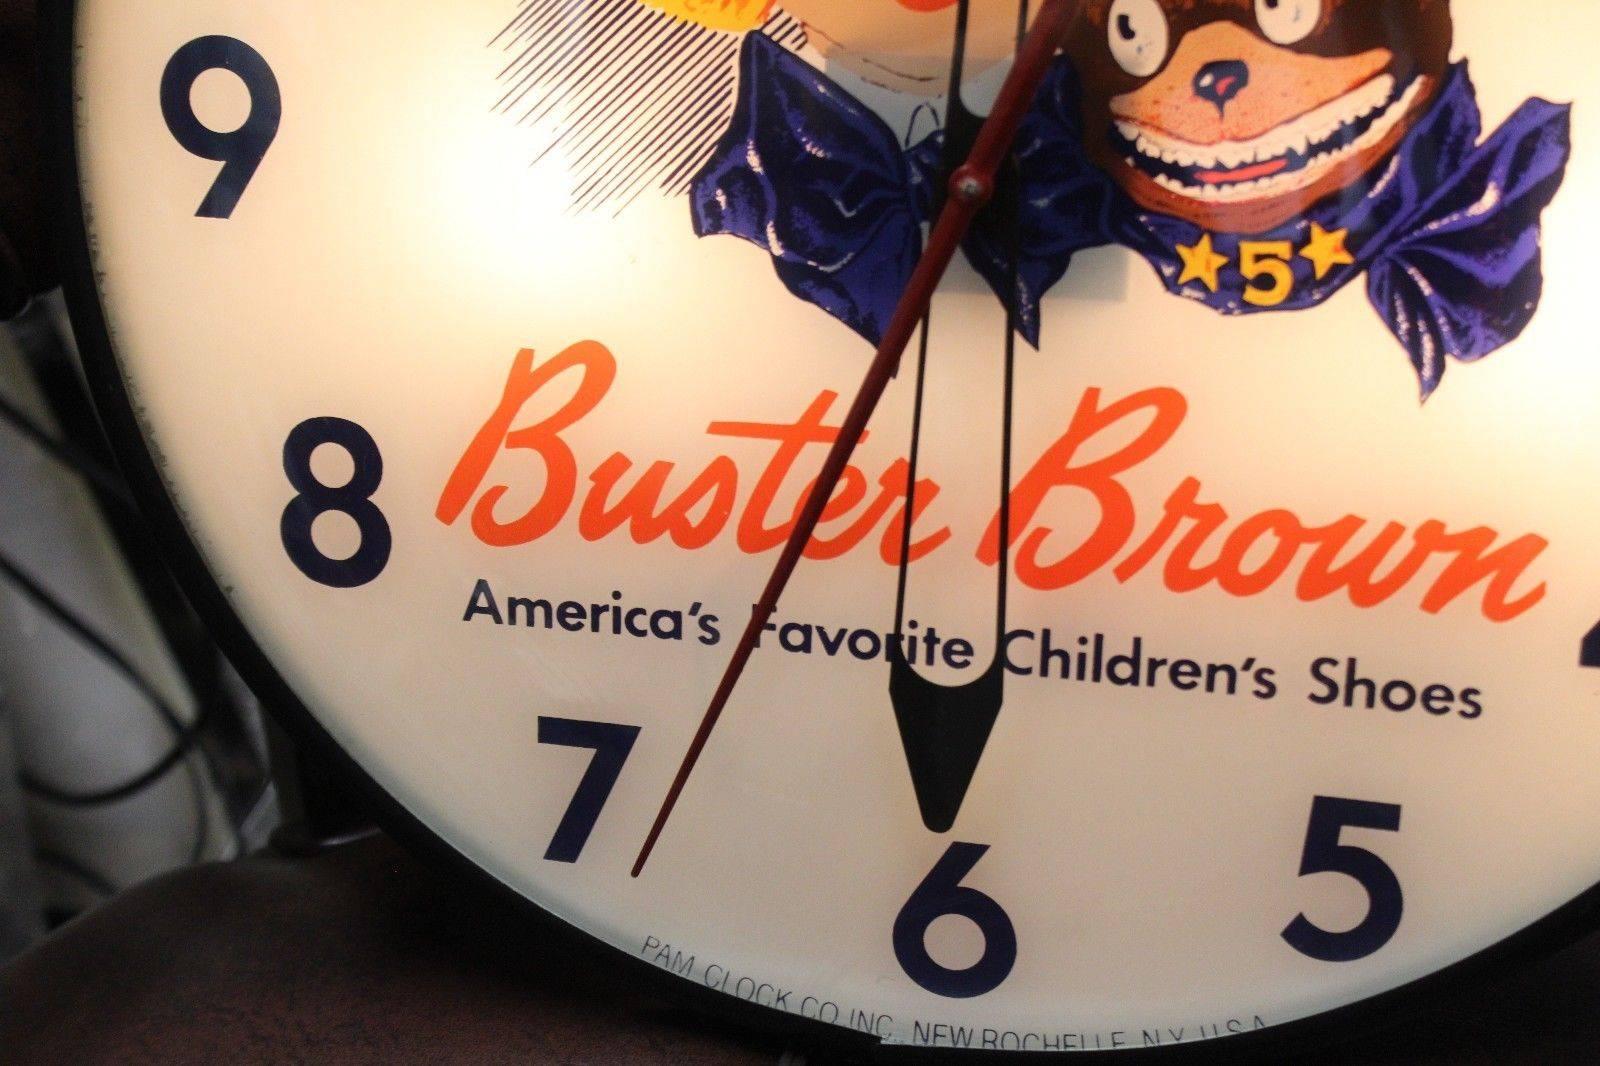 Buster Brown and the dog Tyge is an American Iconic History as far as shoes and advertising goes. This clock was used to advertise Children Shoes by Buster Brown. Advertising is very clean and in great shape. Clock was manufactured by a popular